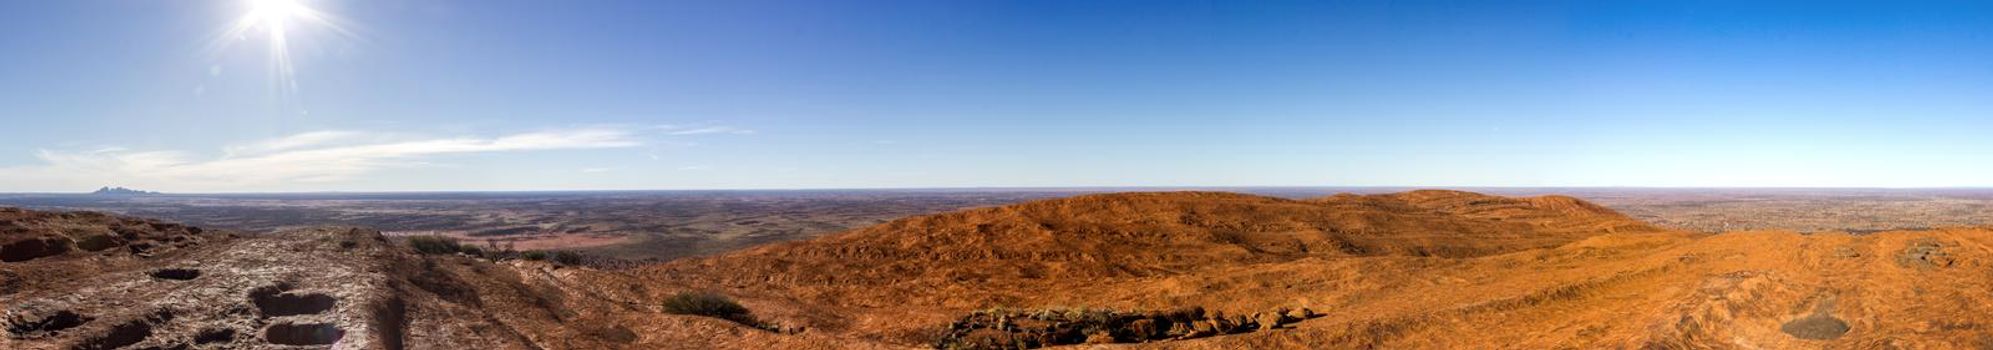 panorama of the view from the uluru after hiking up the Uluru, ayers Rock, the Red Center of Australia